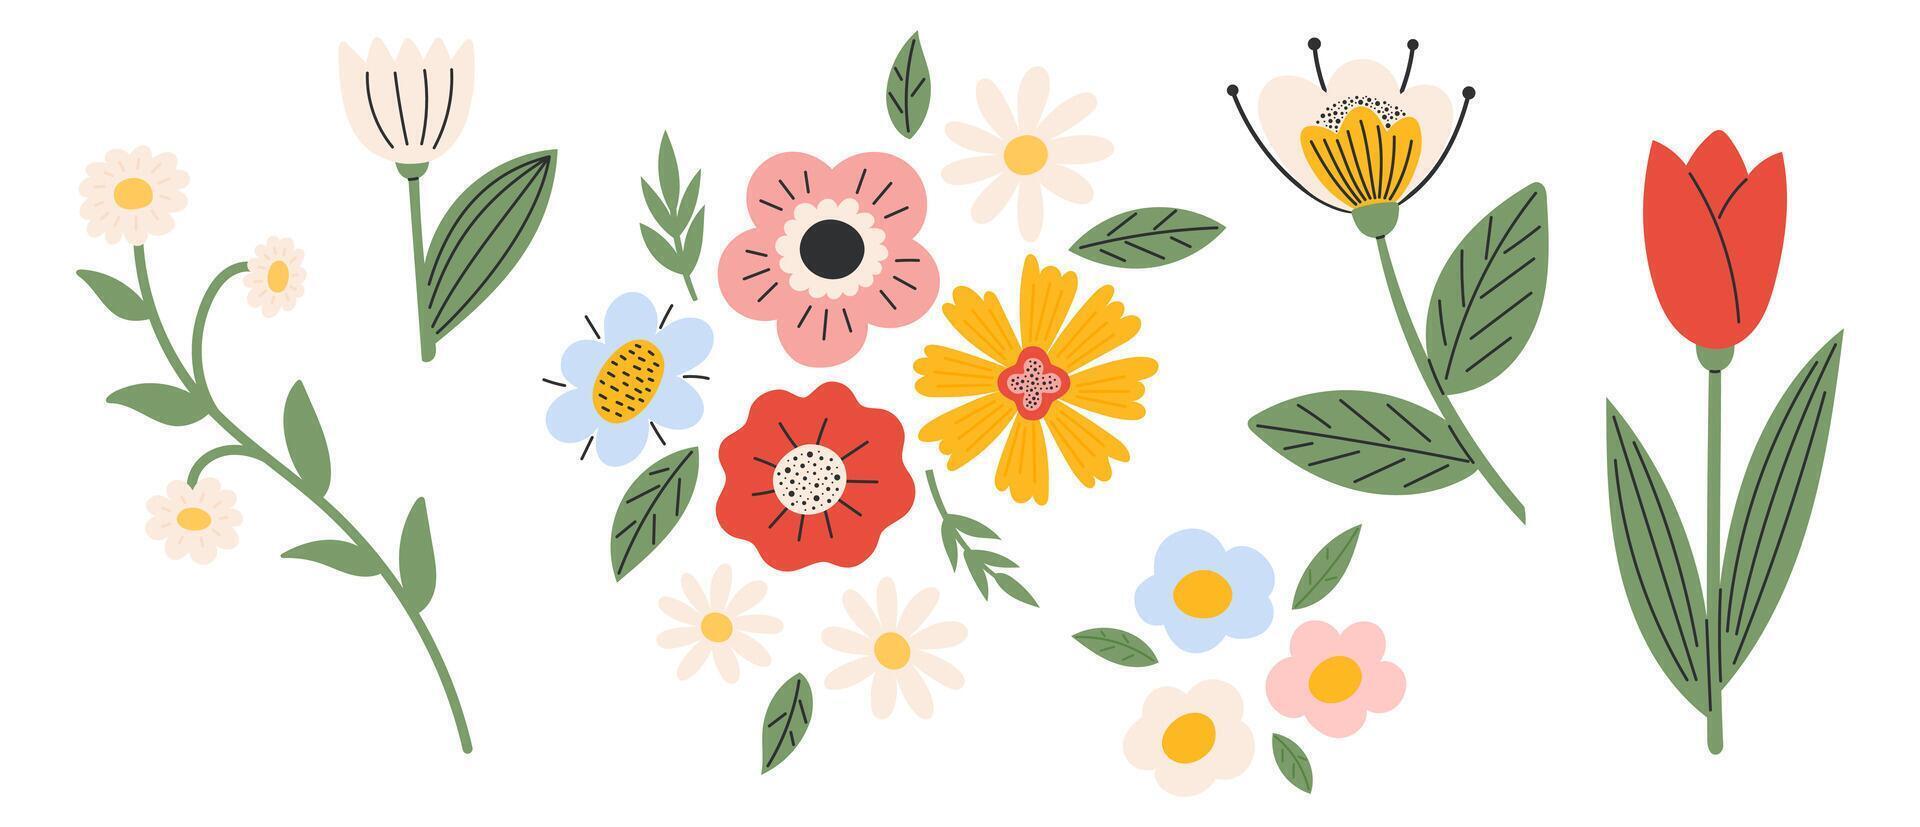 Set flowers and floral elements. Spring and summer nature Botanical objects. Vector illustration in flat hand drawn style